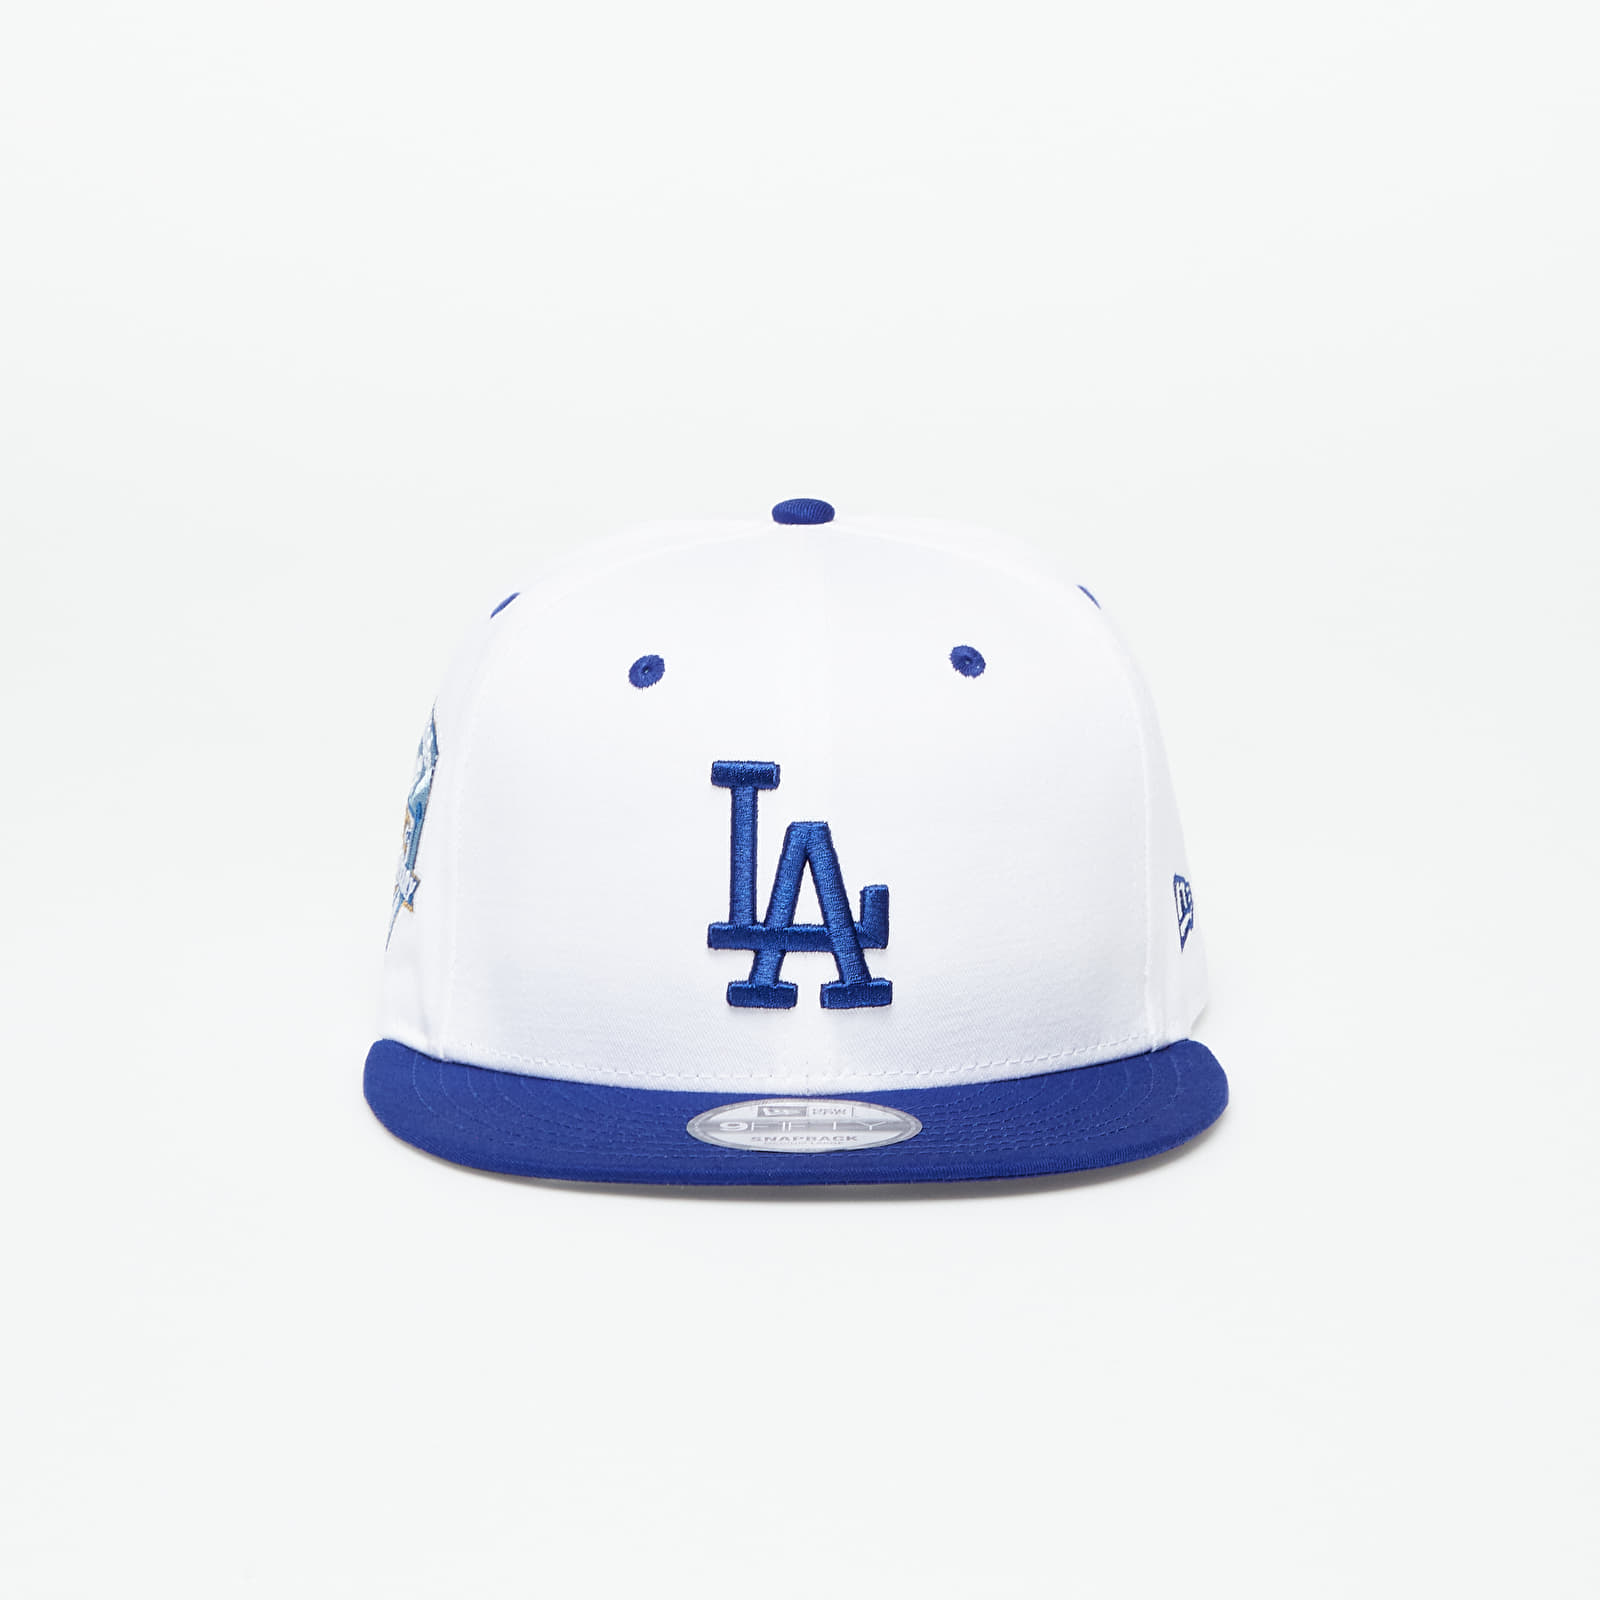 Caps New Era Los Angeles Dodgers White Crown Patch 9Fifty Snapback Cap Optic White/ Light Royal/ Bright Royal